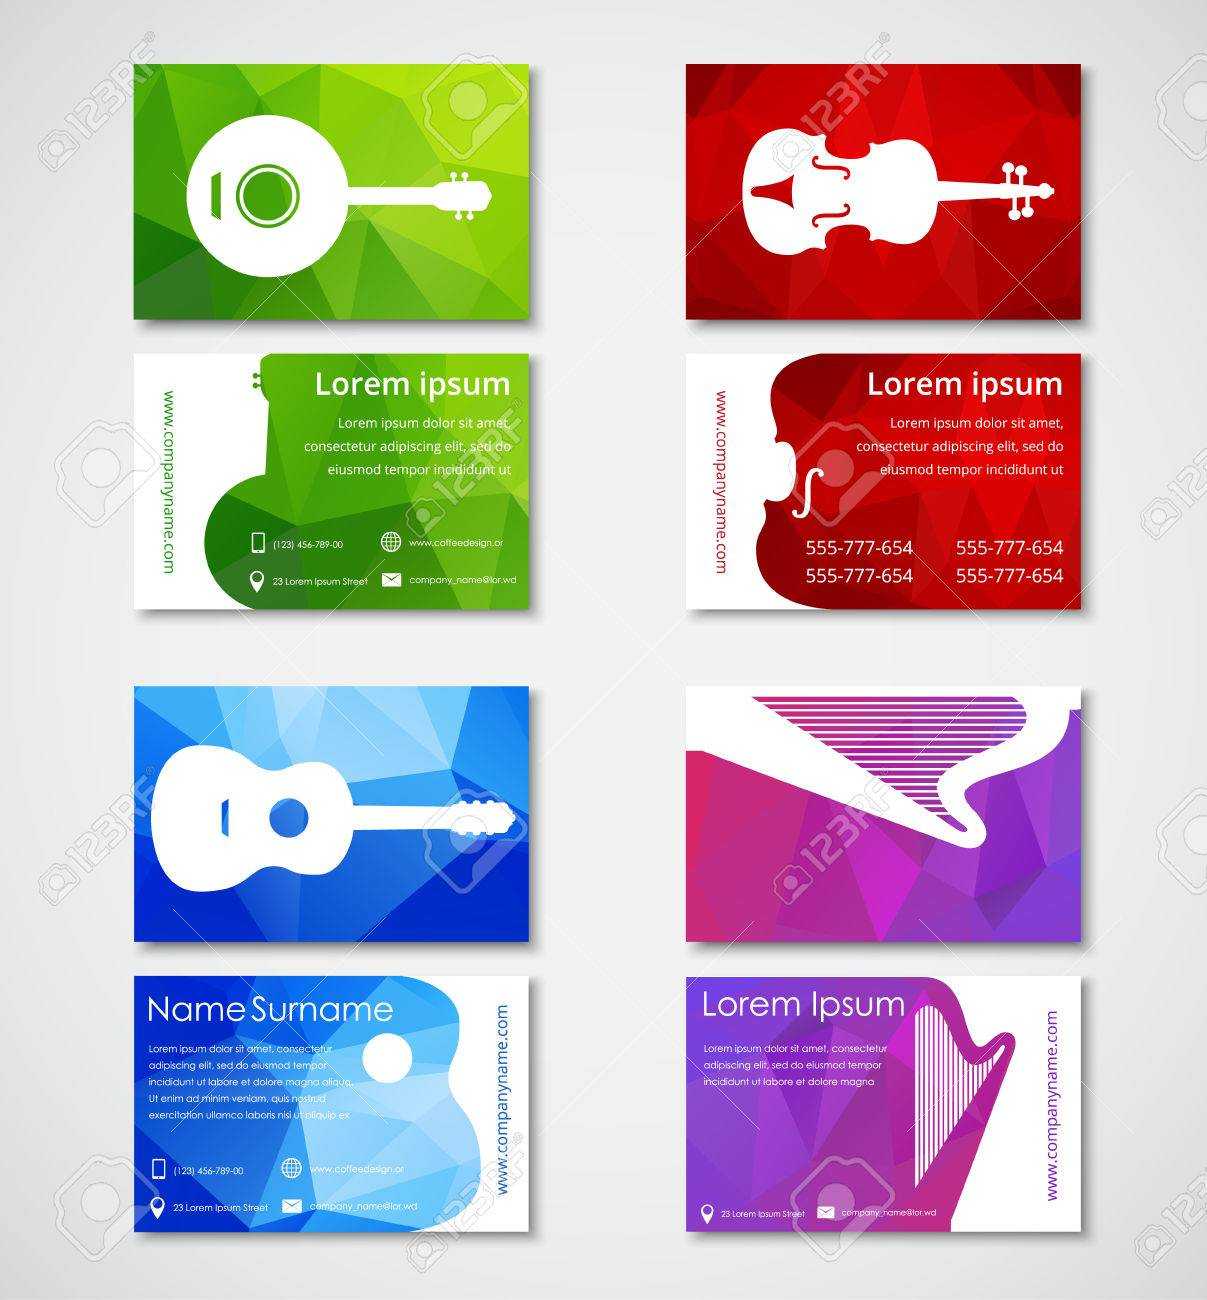 Templates For Visiting Cards ] – 100 Free Business Cards Psd Inside Advocare Business Card Template